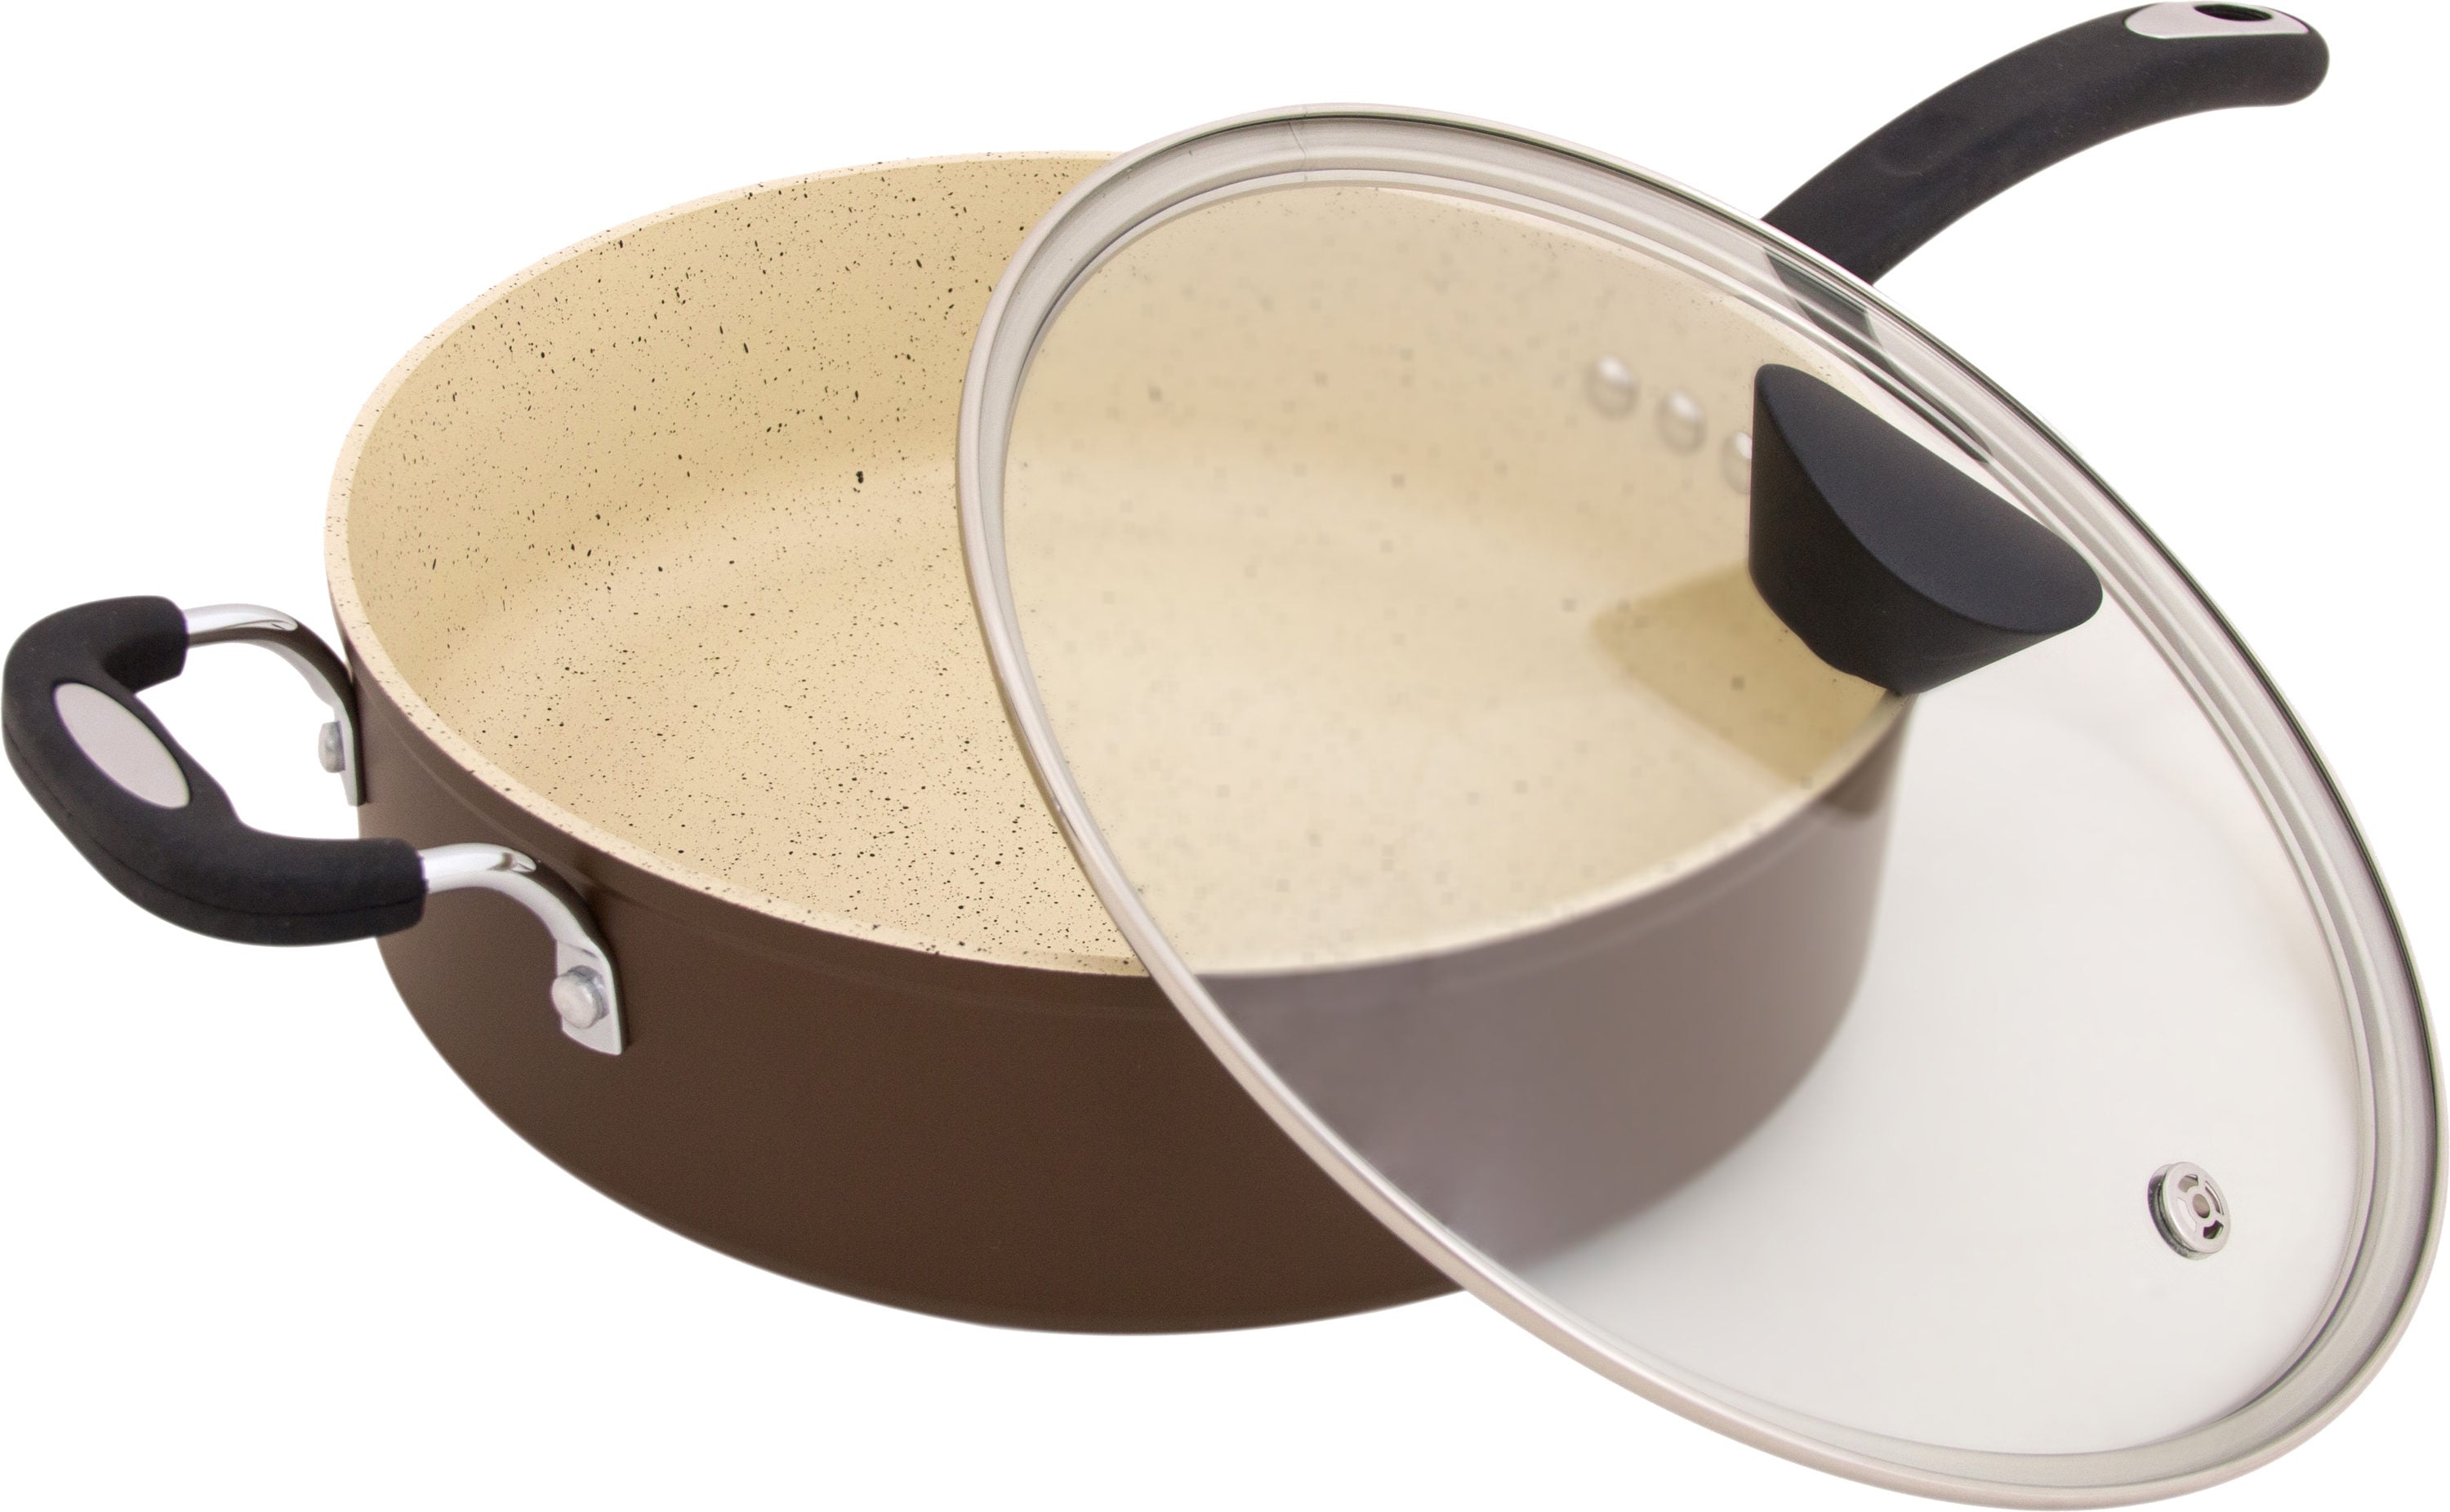  The All-In-One Stone Sauce Pan by Ozeri -- 100% APEO